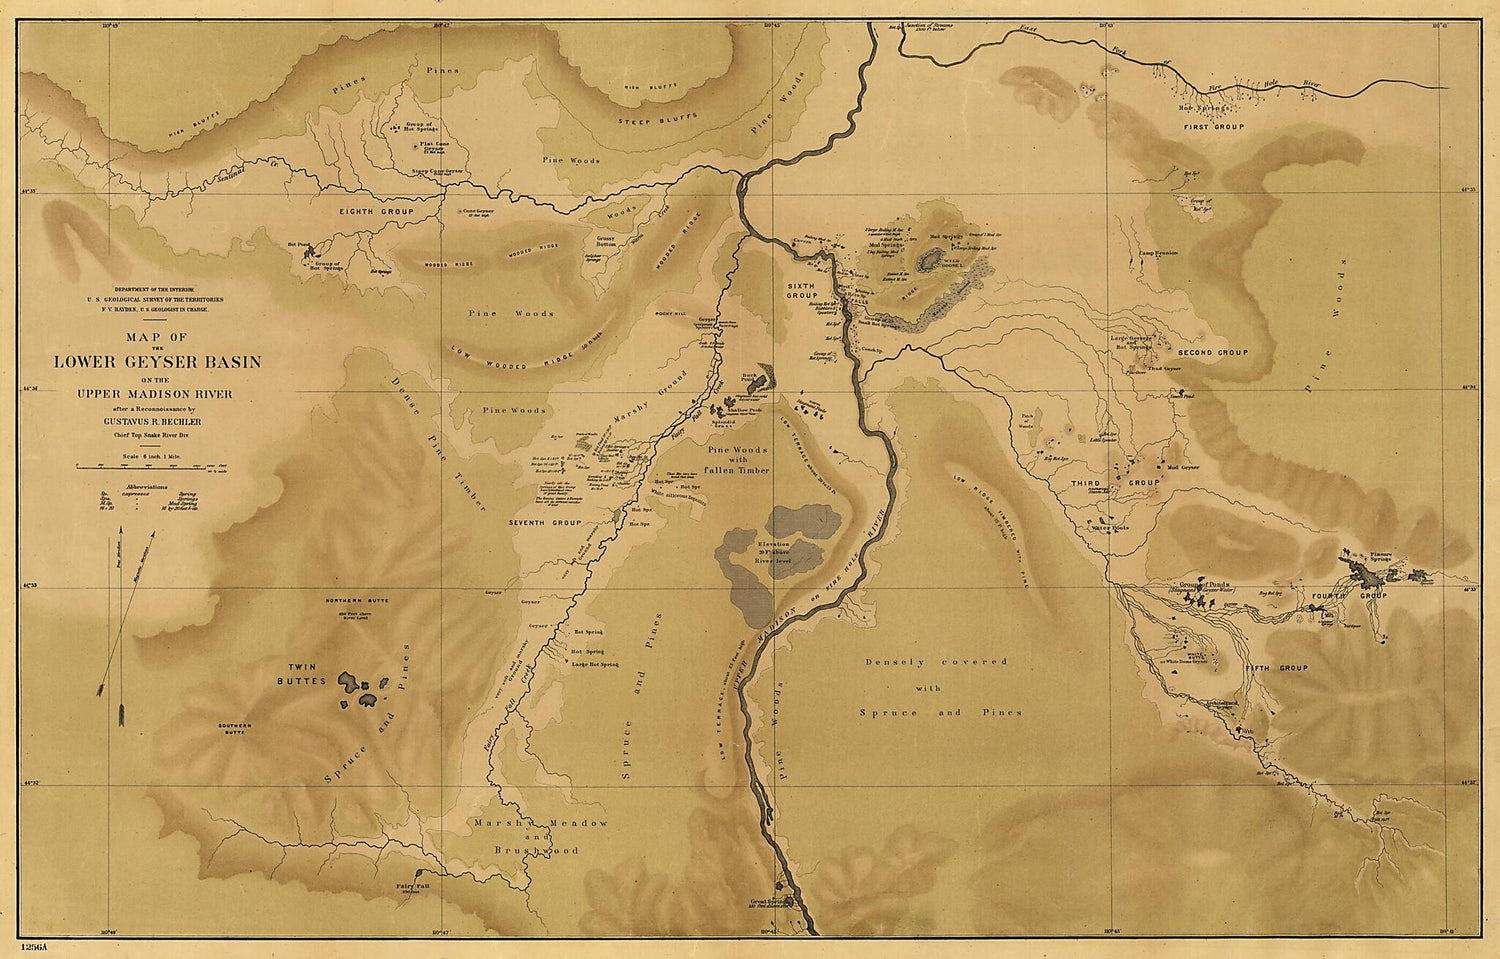 This old map of Map of the Lower Geyser Basin of the Upper Madison River from 1872 was created by Gustavus R. Bechler,  Geological and Geographical Survey of the Territories (U.S.) in 1872